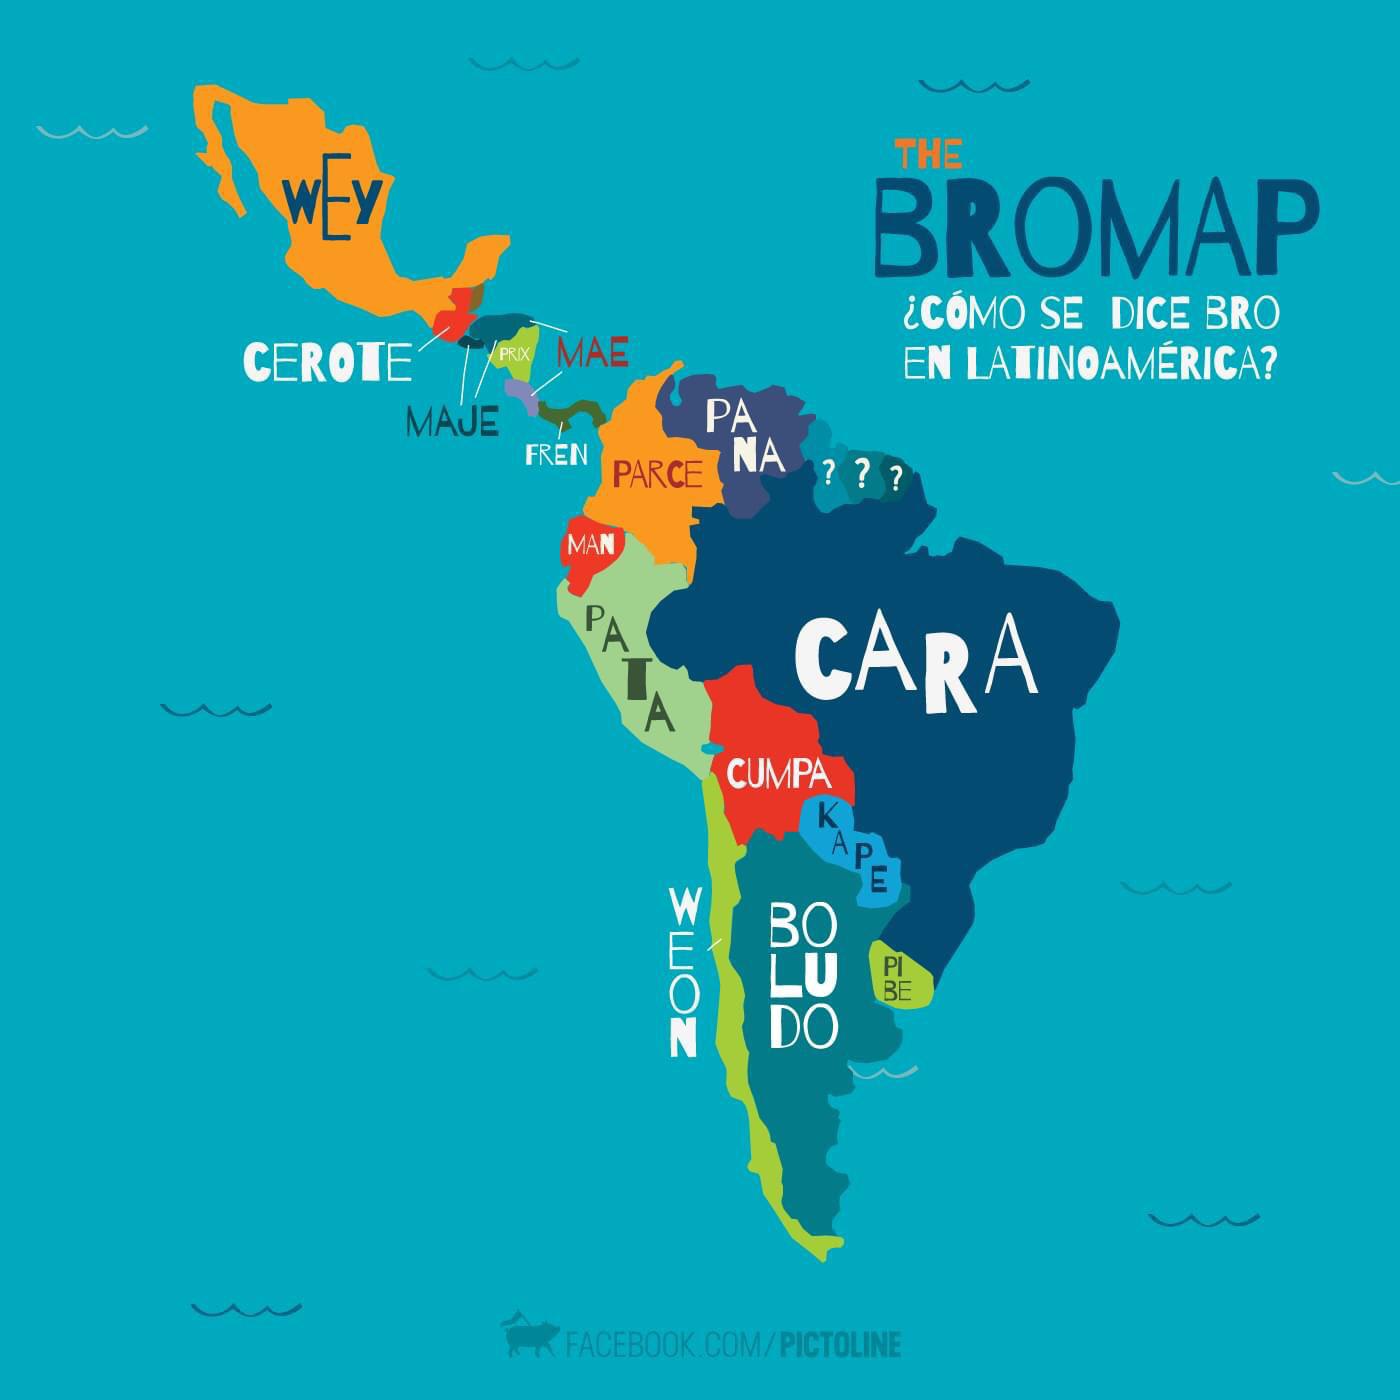 The Bromap: How do they say “Bro” in Latin America?